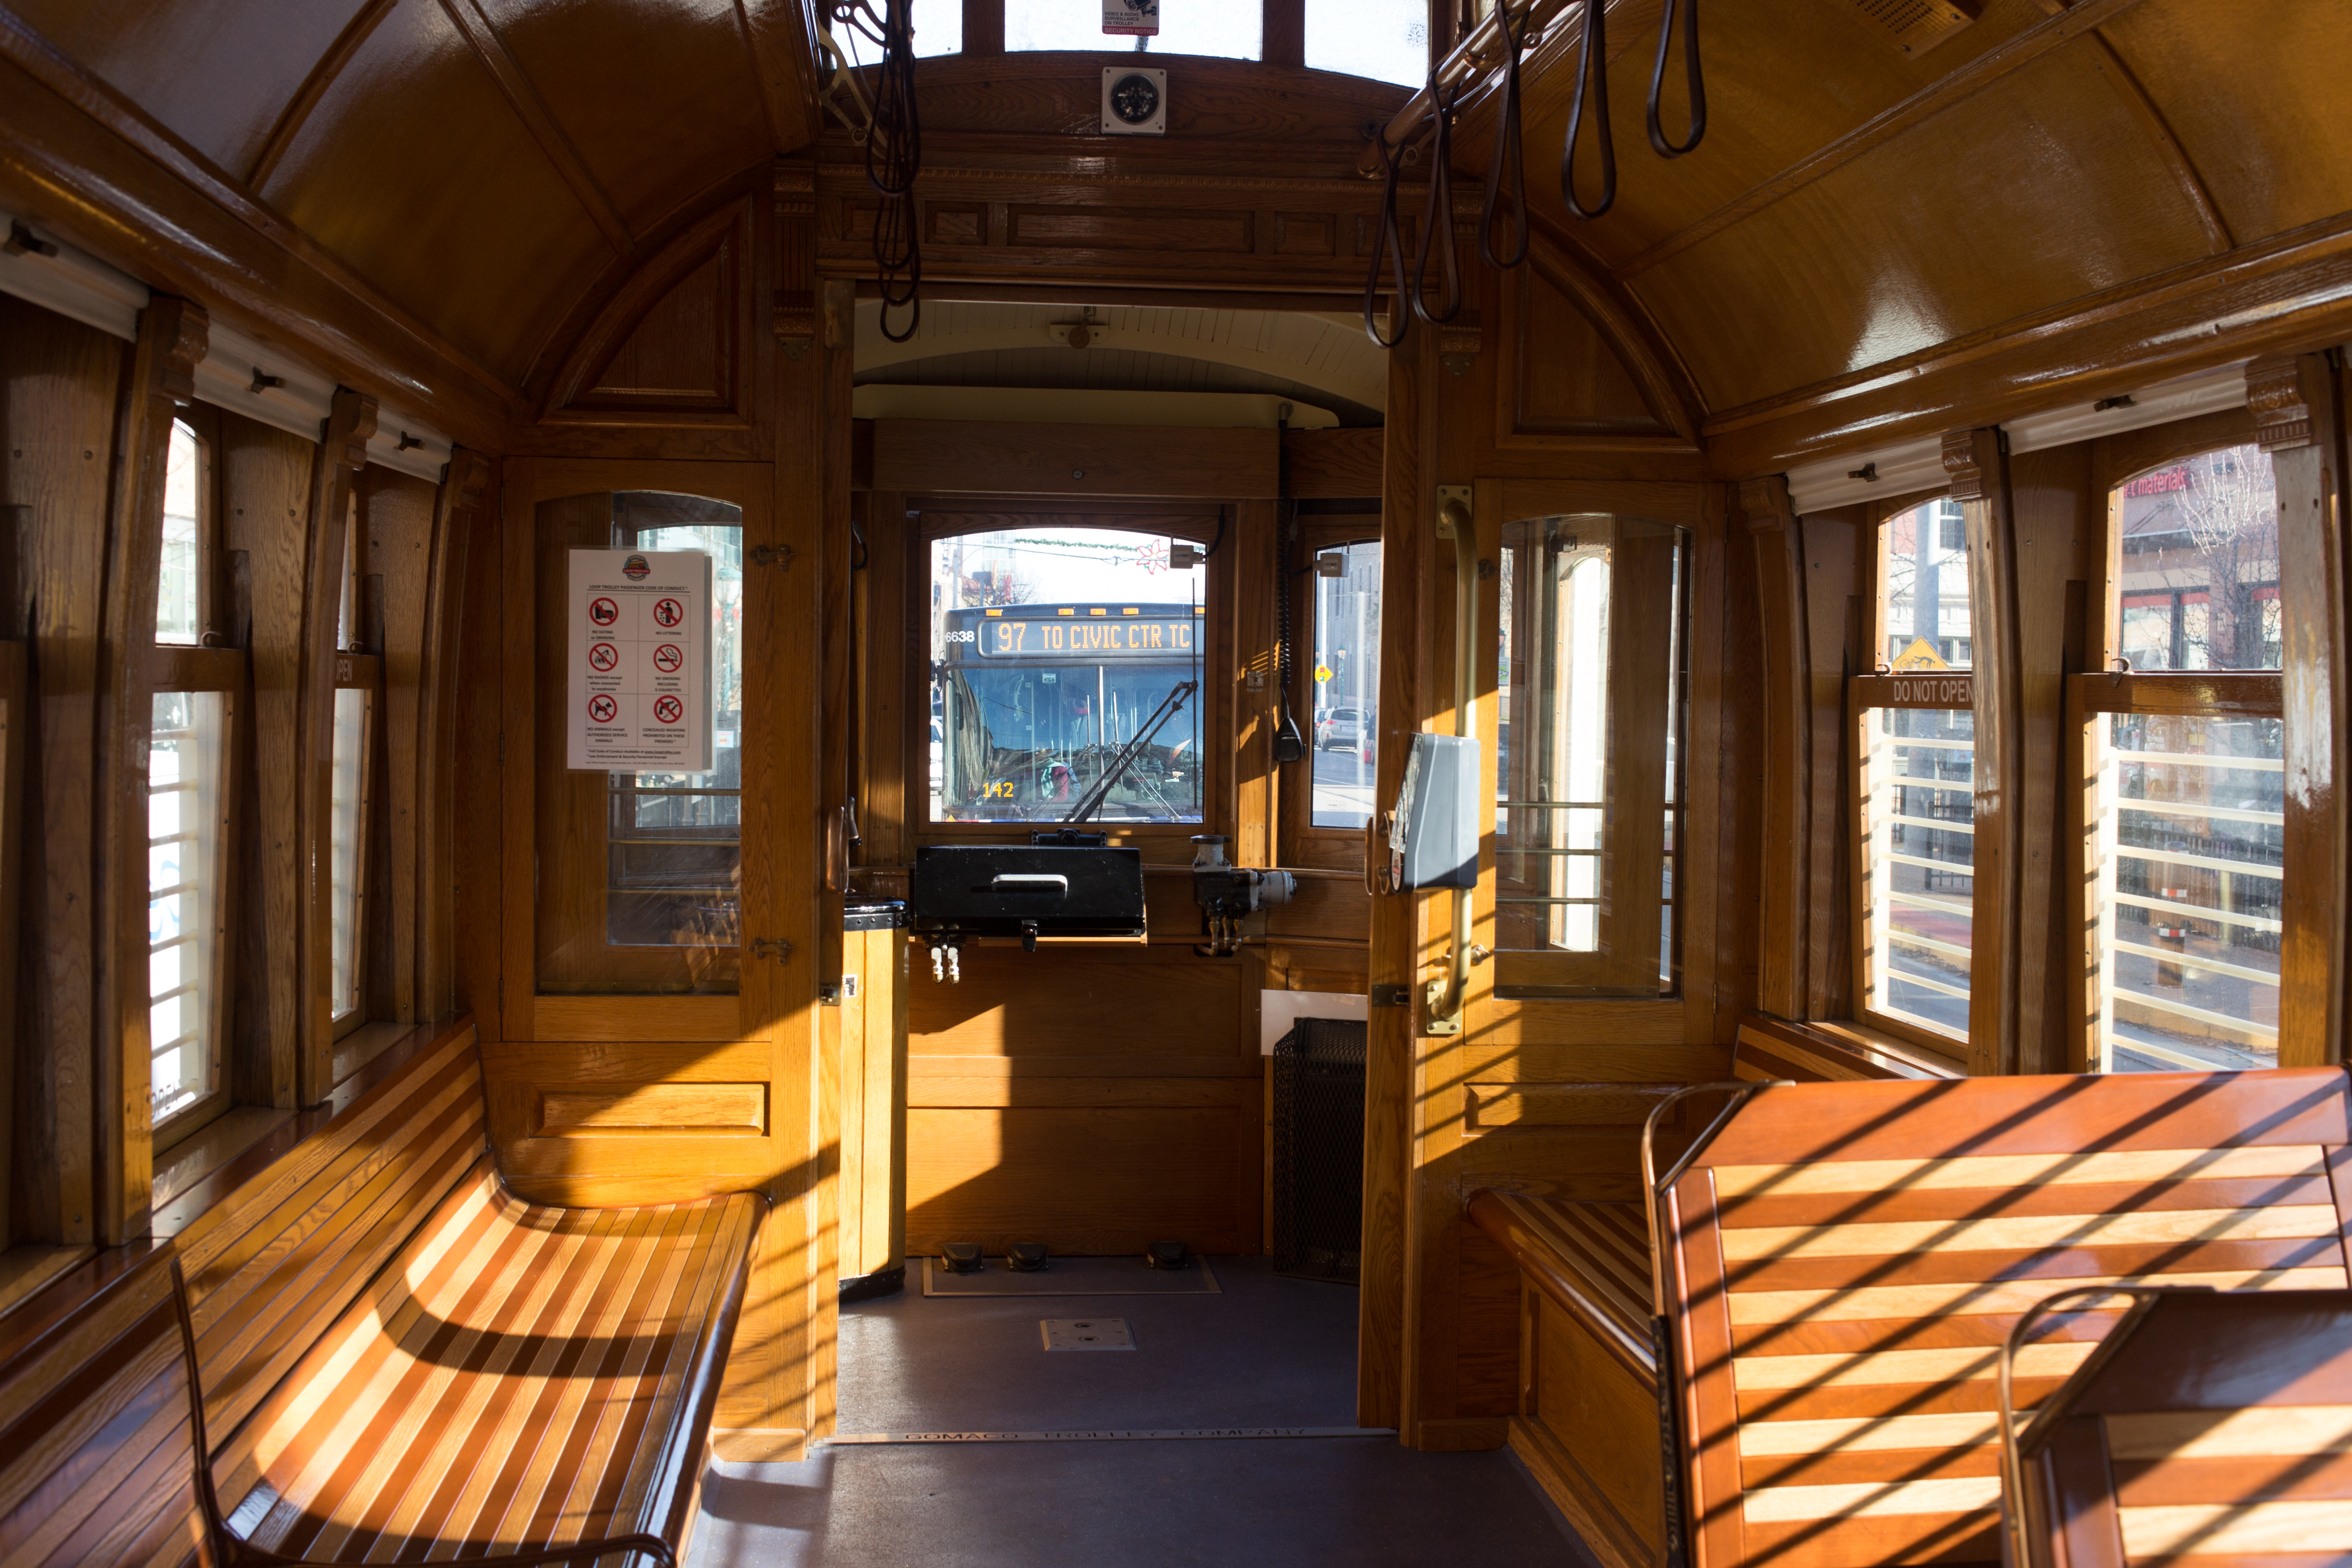 File Interior Of Loop Trolley Car Towards End Without